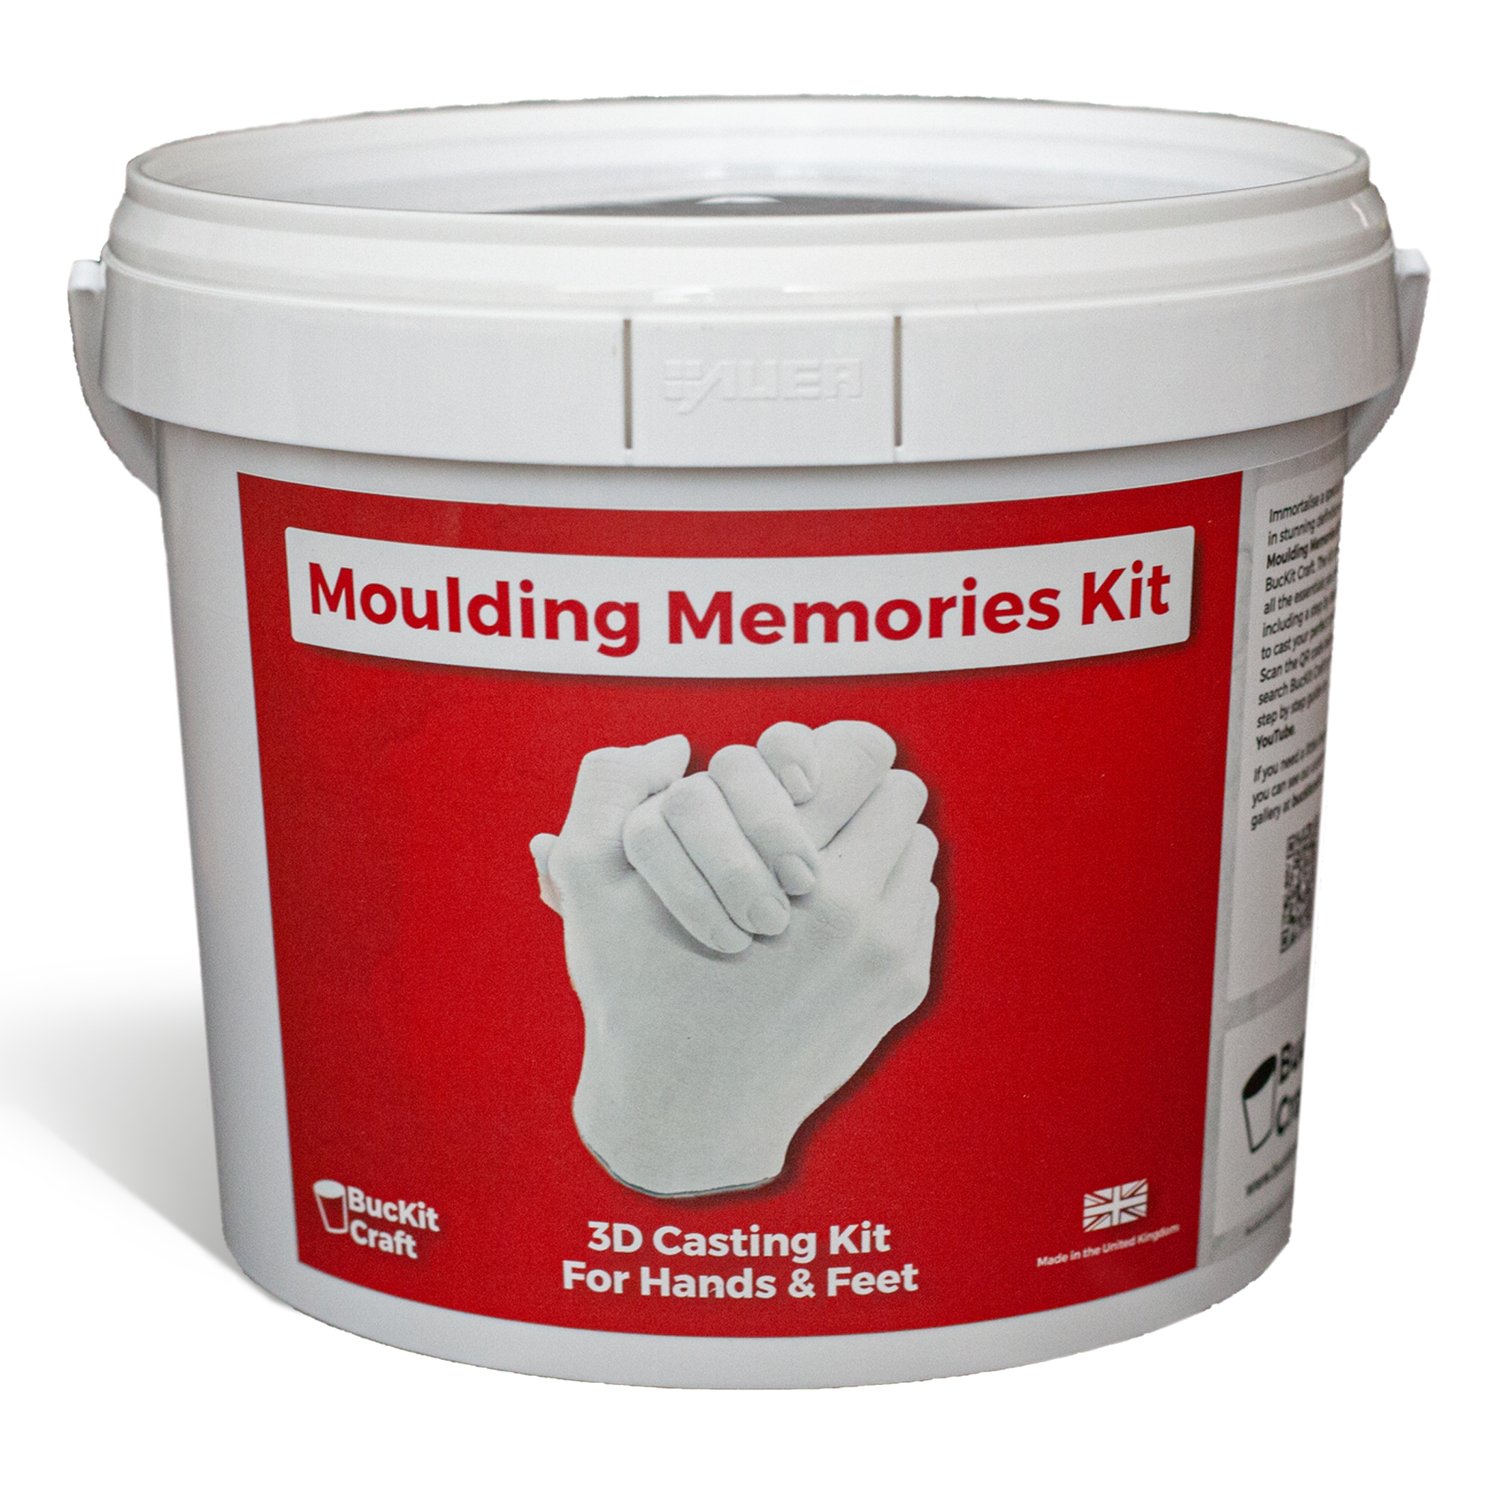 Hand Casting Kit - Complete Hand Molding with Plaster, Bucket, Gloves,  Finishing Tools, Display Stand, Instructions & More! - Hand Mold Kit  Couples & All Ages Can DIY to Preserve Sculpture Memories